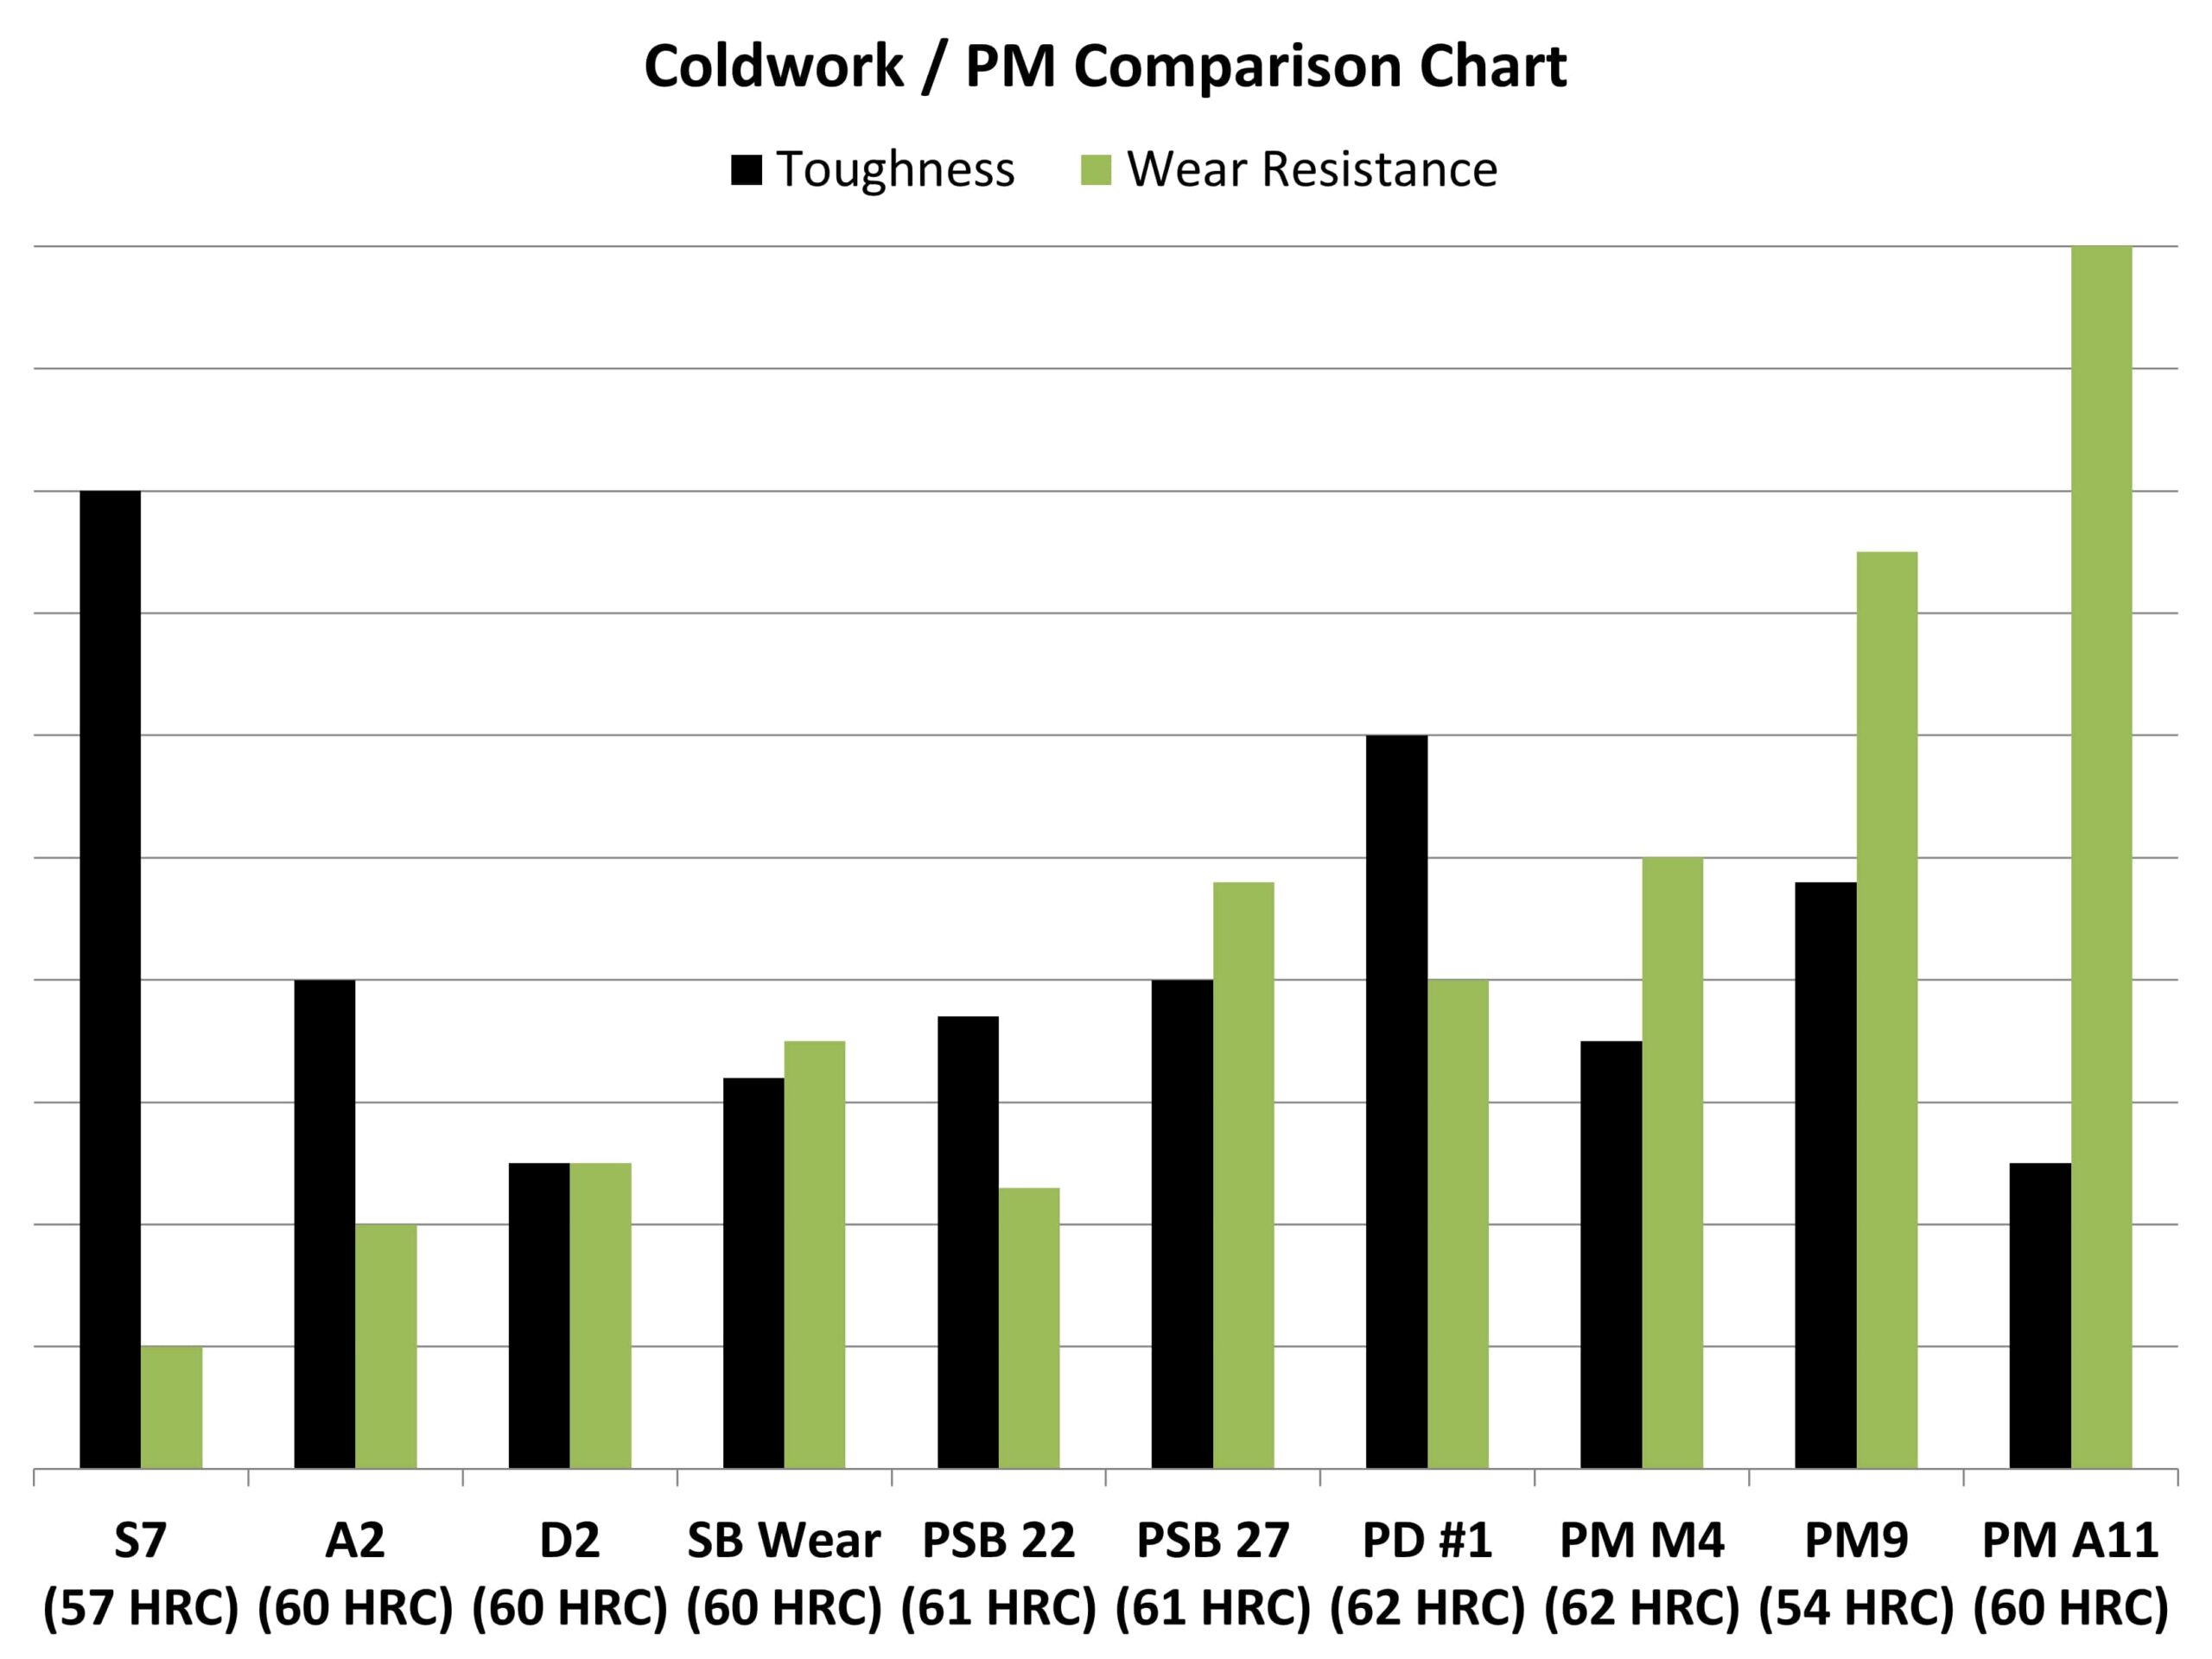 Bar graph comparing the physical characteristics of toughness and wear resistance of the coldwork and PM grades of S7, A2, D2, SB Wear, PSB 22, PSB 27, PD #1, PMM4, PM9, and PM A11.